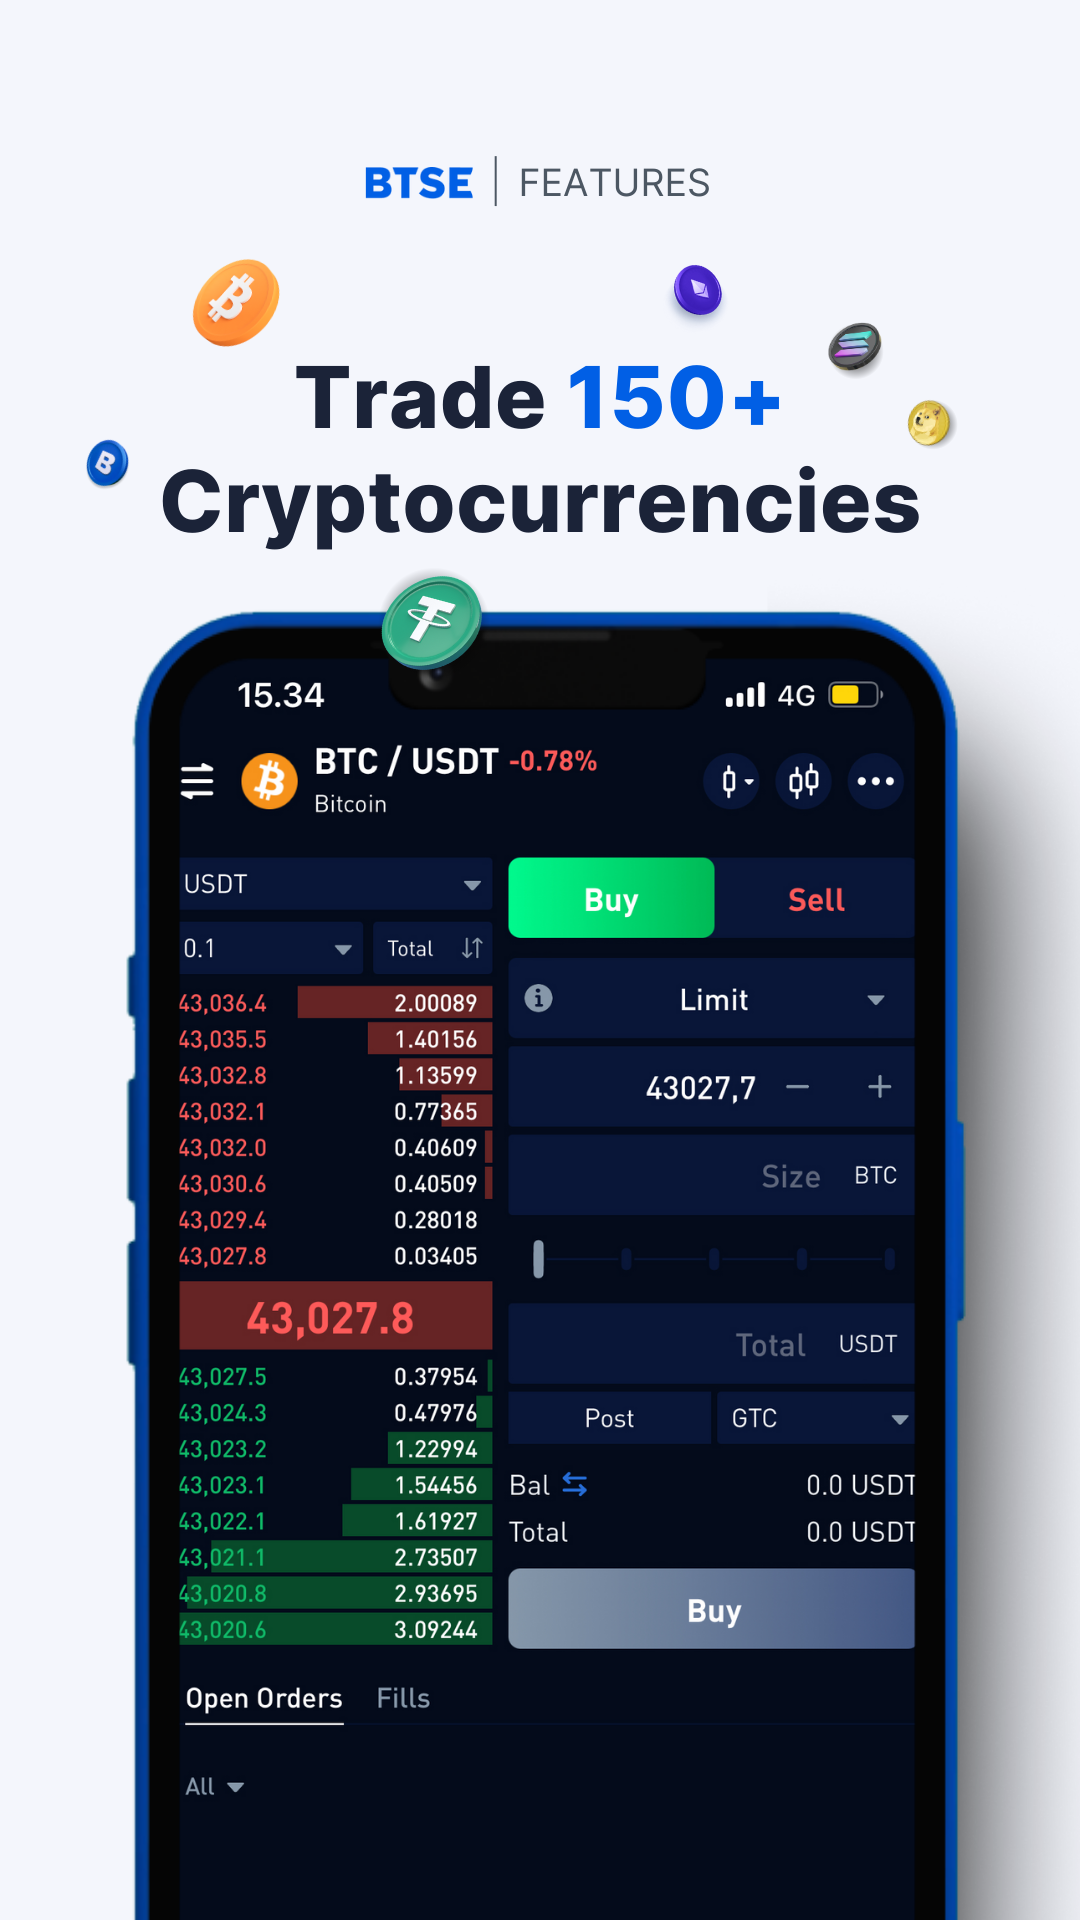 How many cryptocurrencies does BTSE support